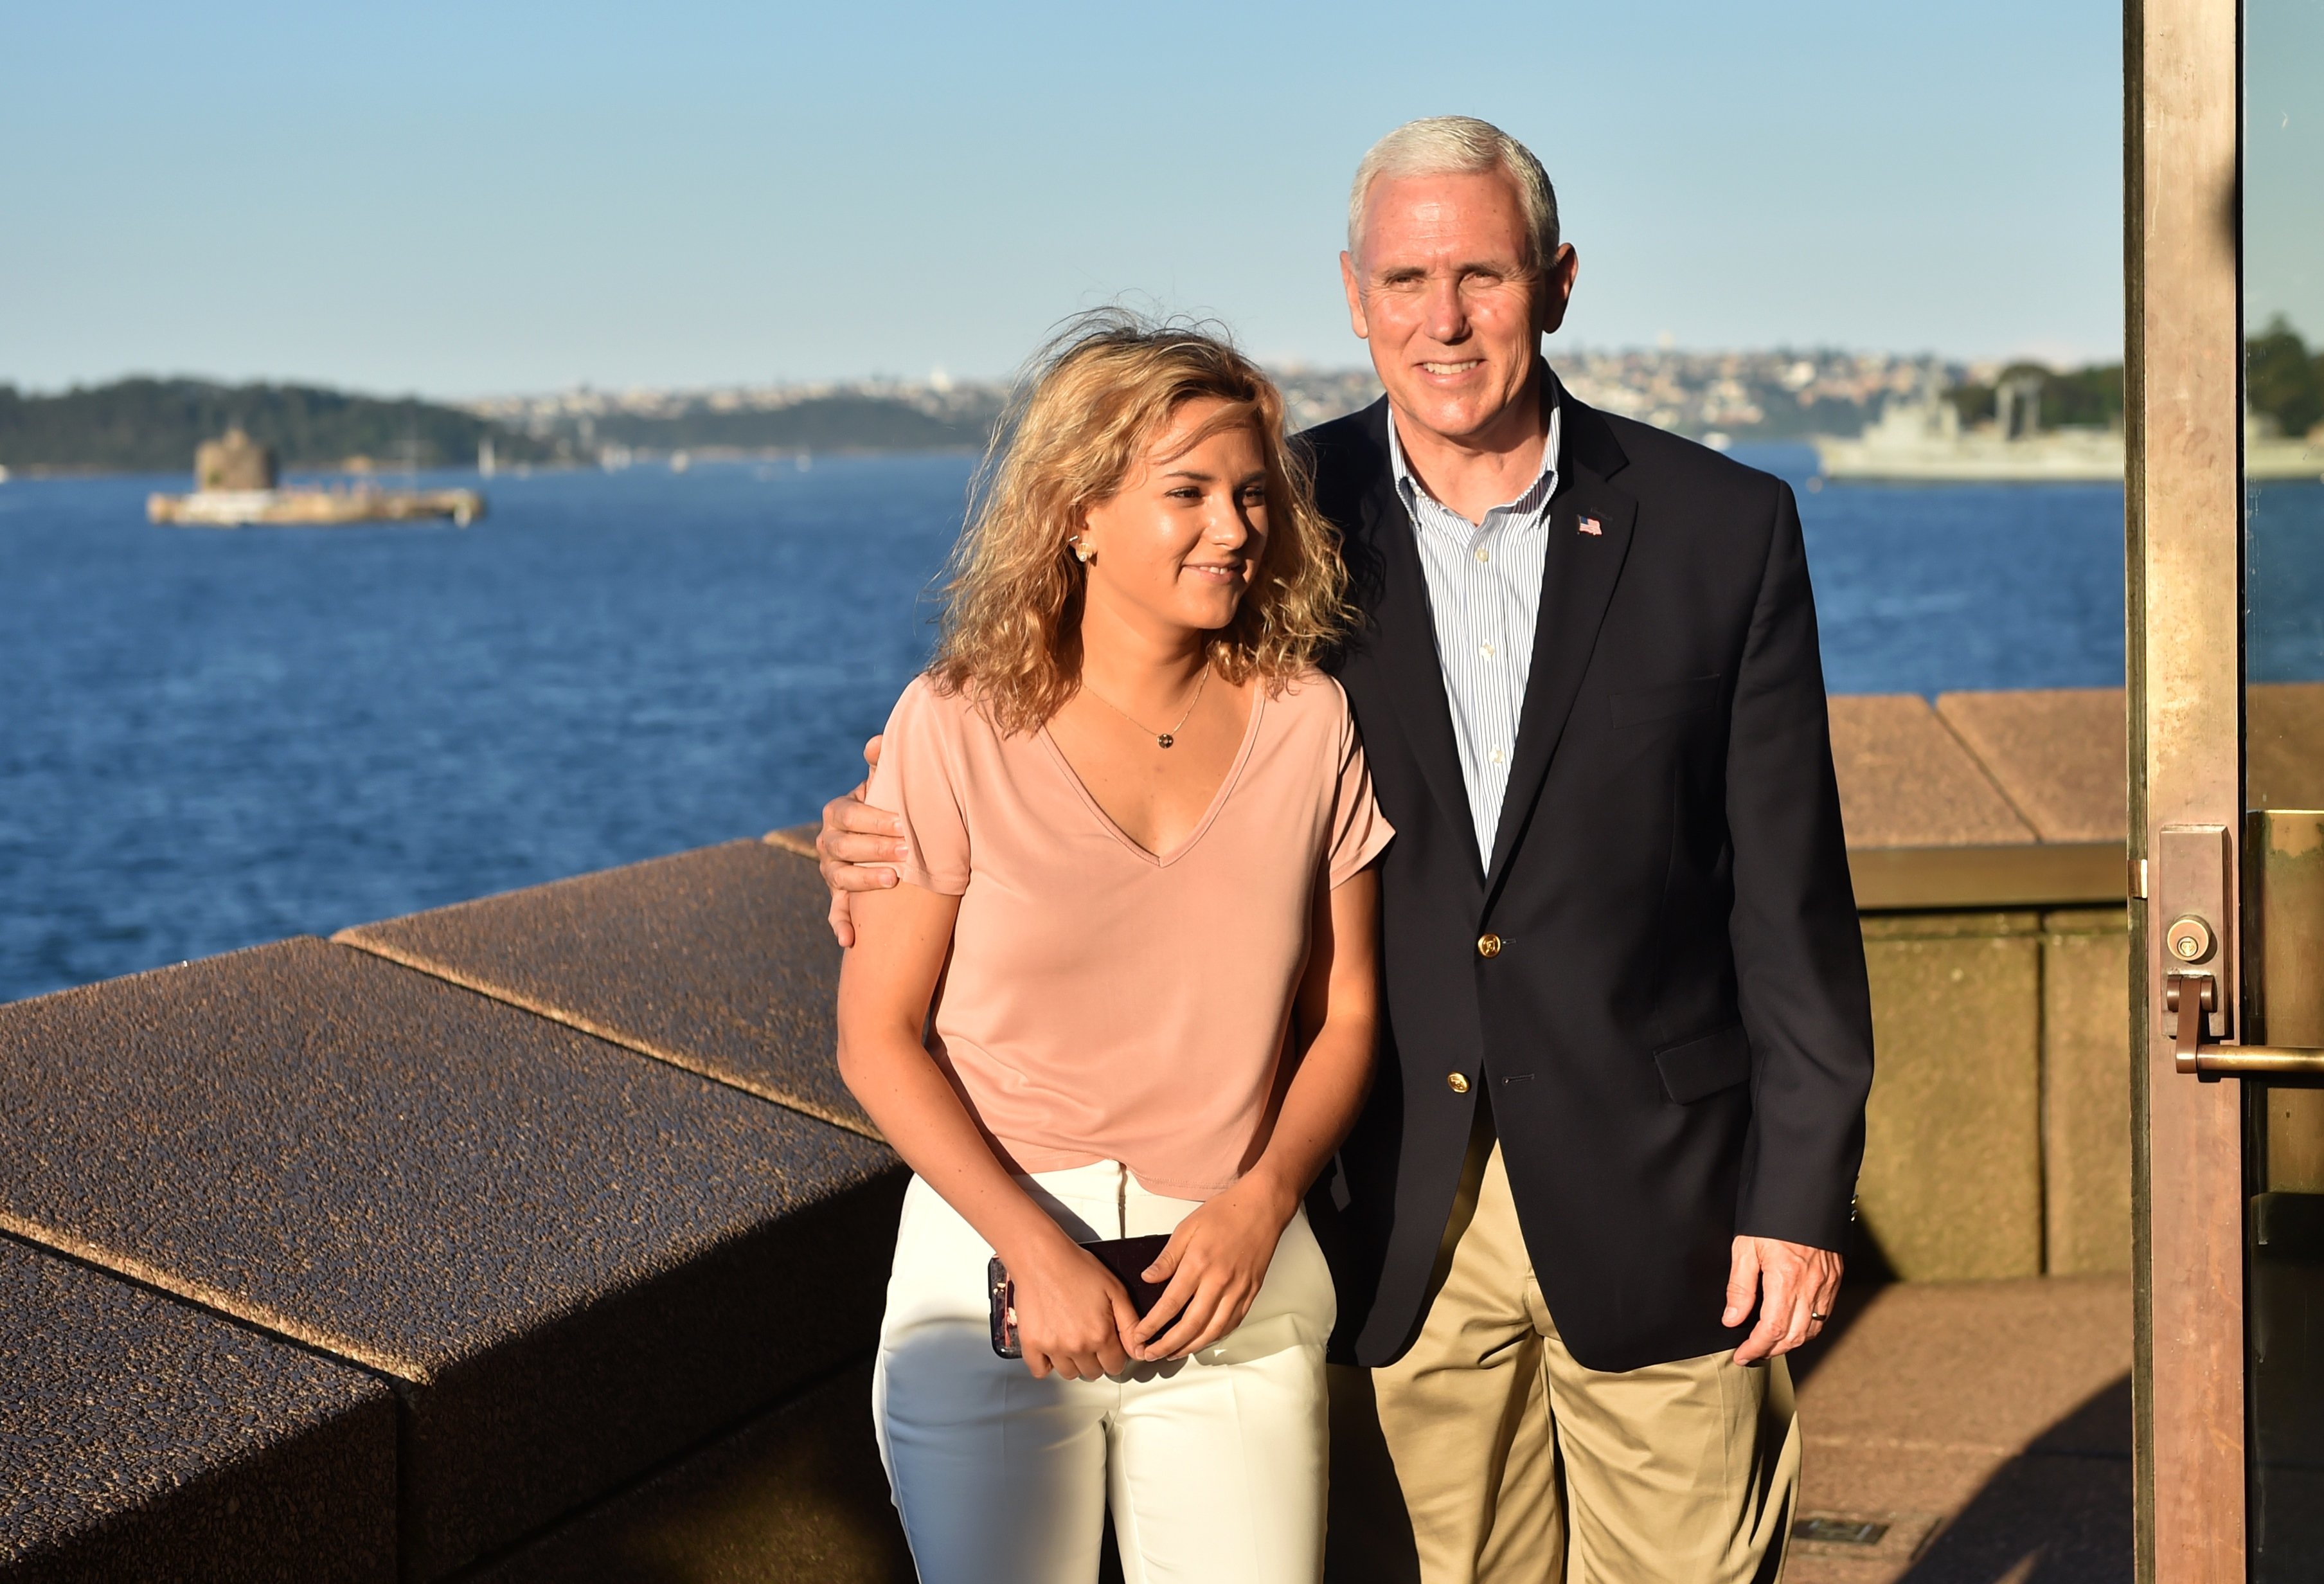  Mike Pence  visits the Opera House with his daughter Charlotte on April 23, 2017 in Sydney, Australia | Photo: GettyImages